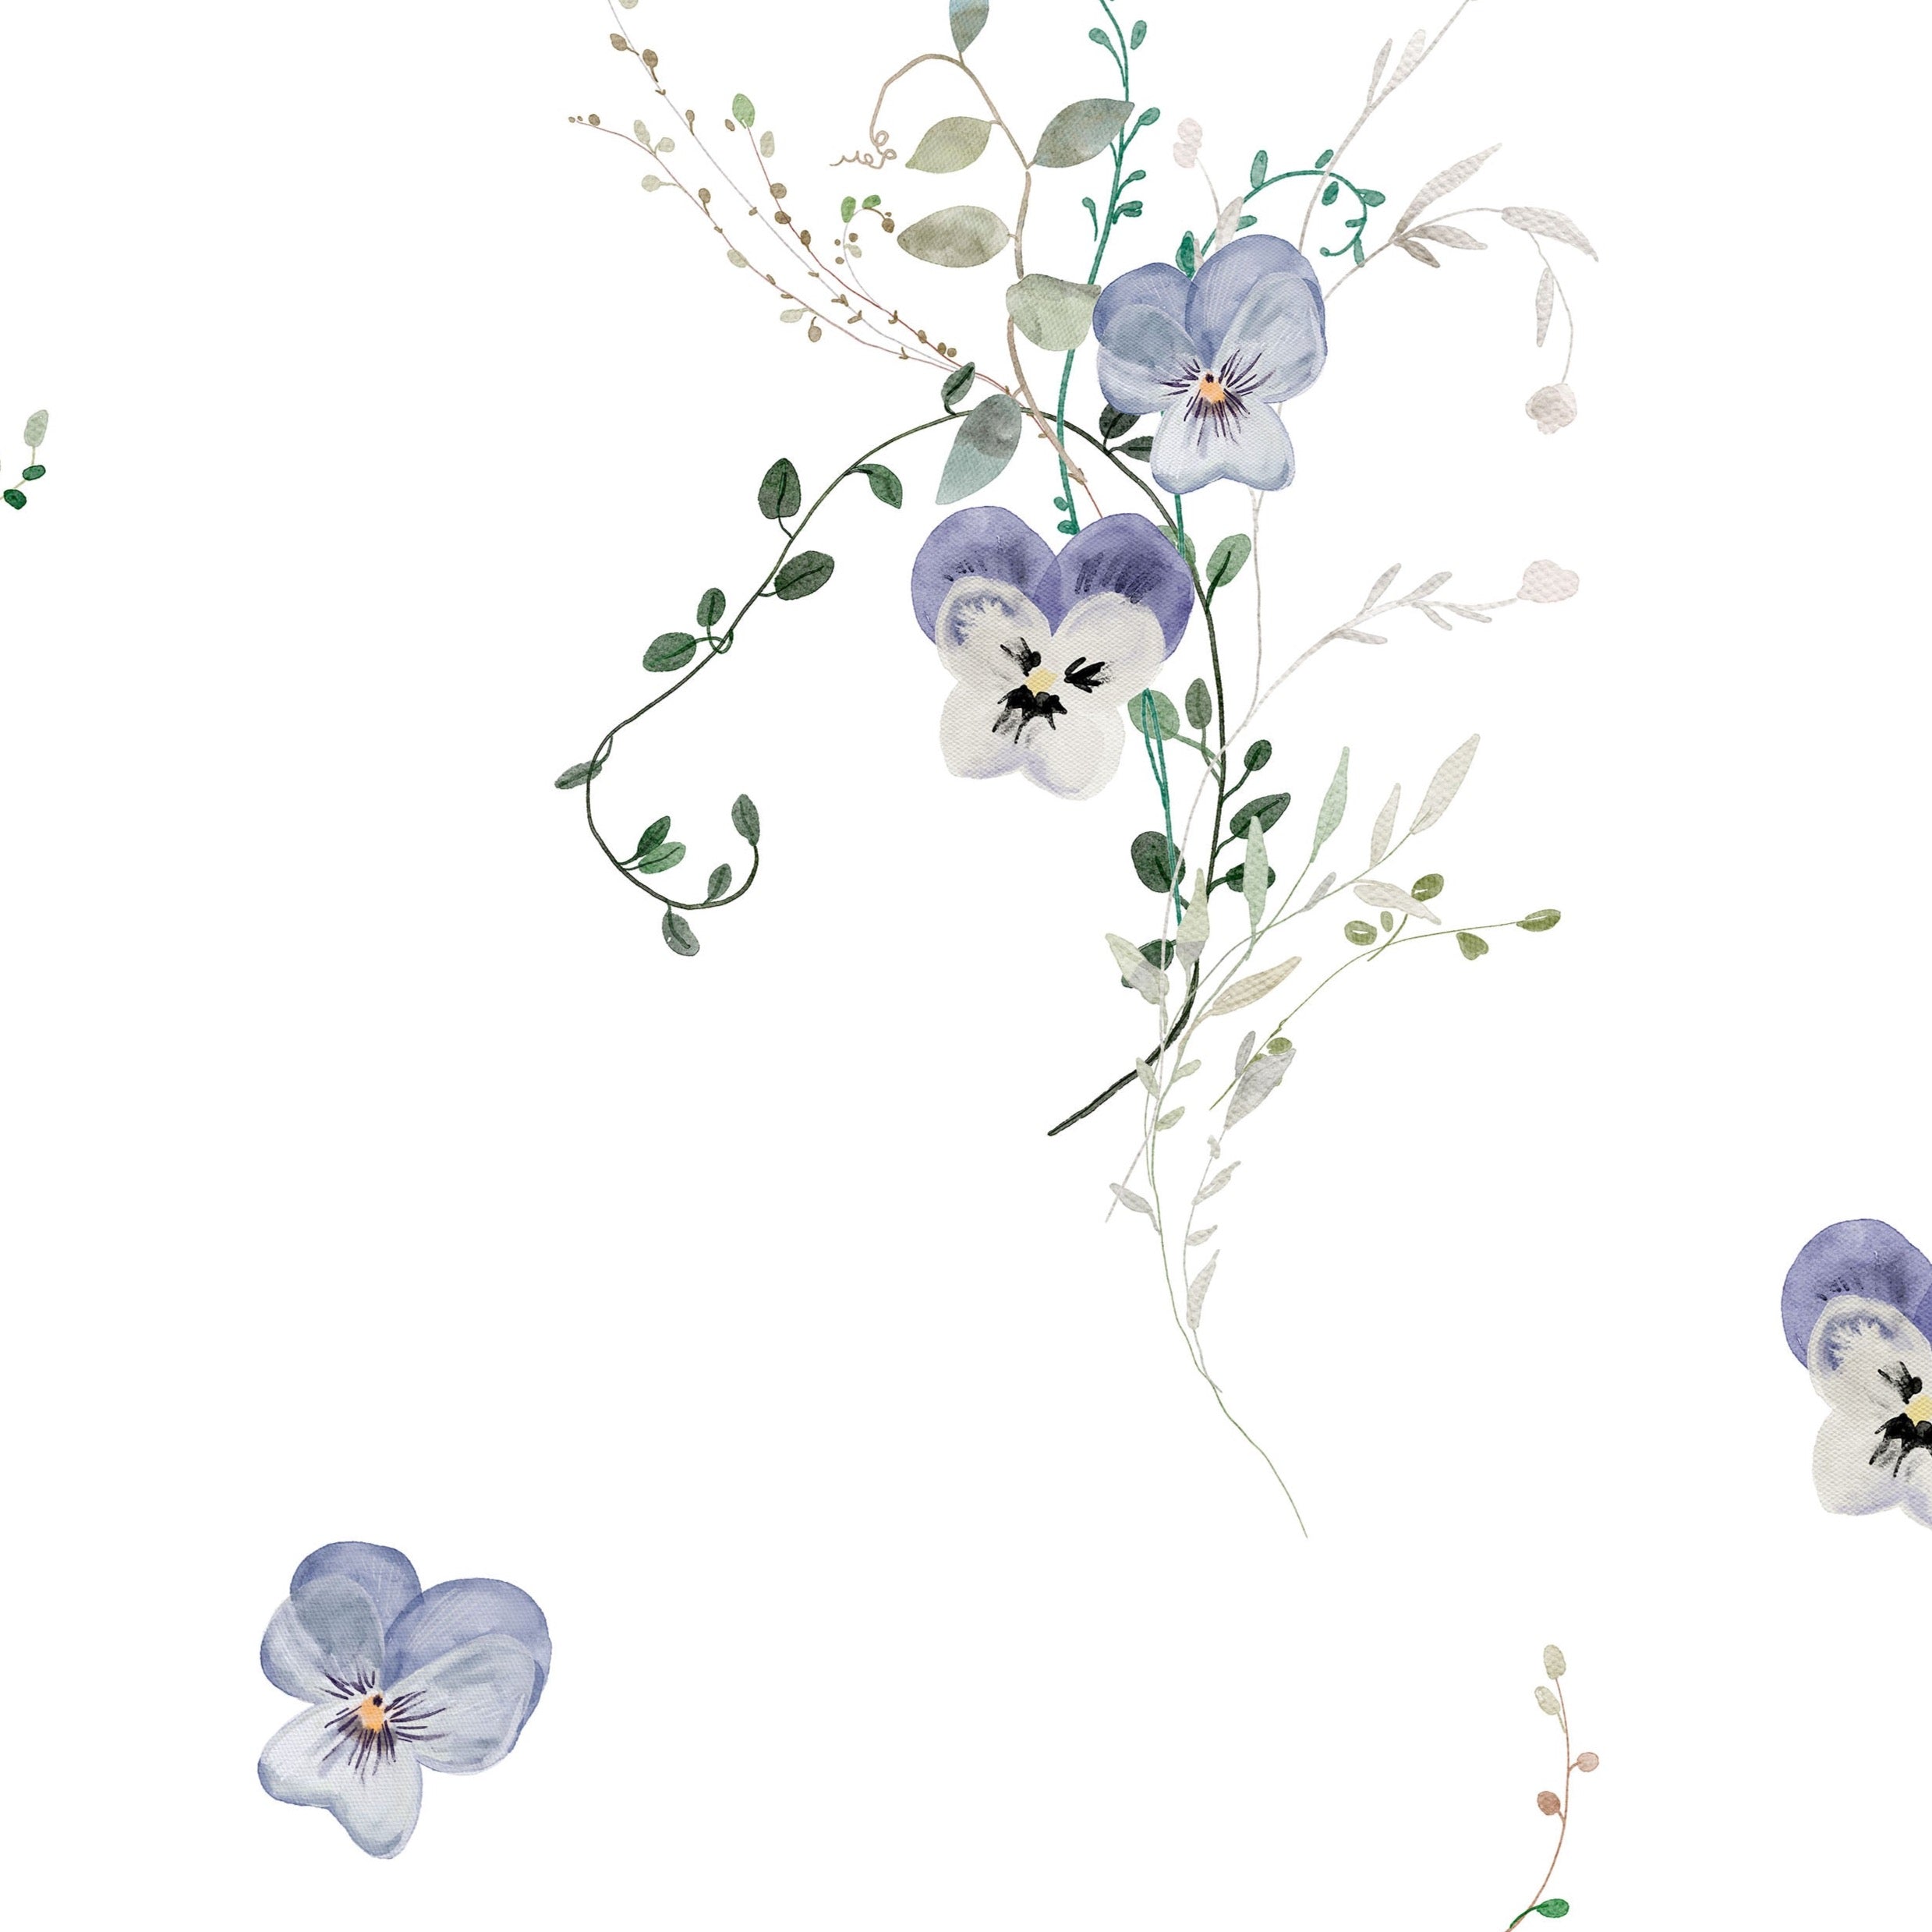 A close-up view of the Delicate Blue Wildflower Wallpaper, showcasing its intricate pattern of blue wildflowers and greenery. The design provides a whimsical and airy feel, perfect for creating a calming sanctuary in any room.